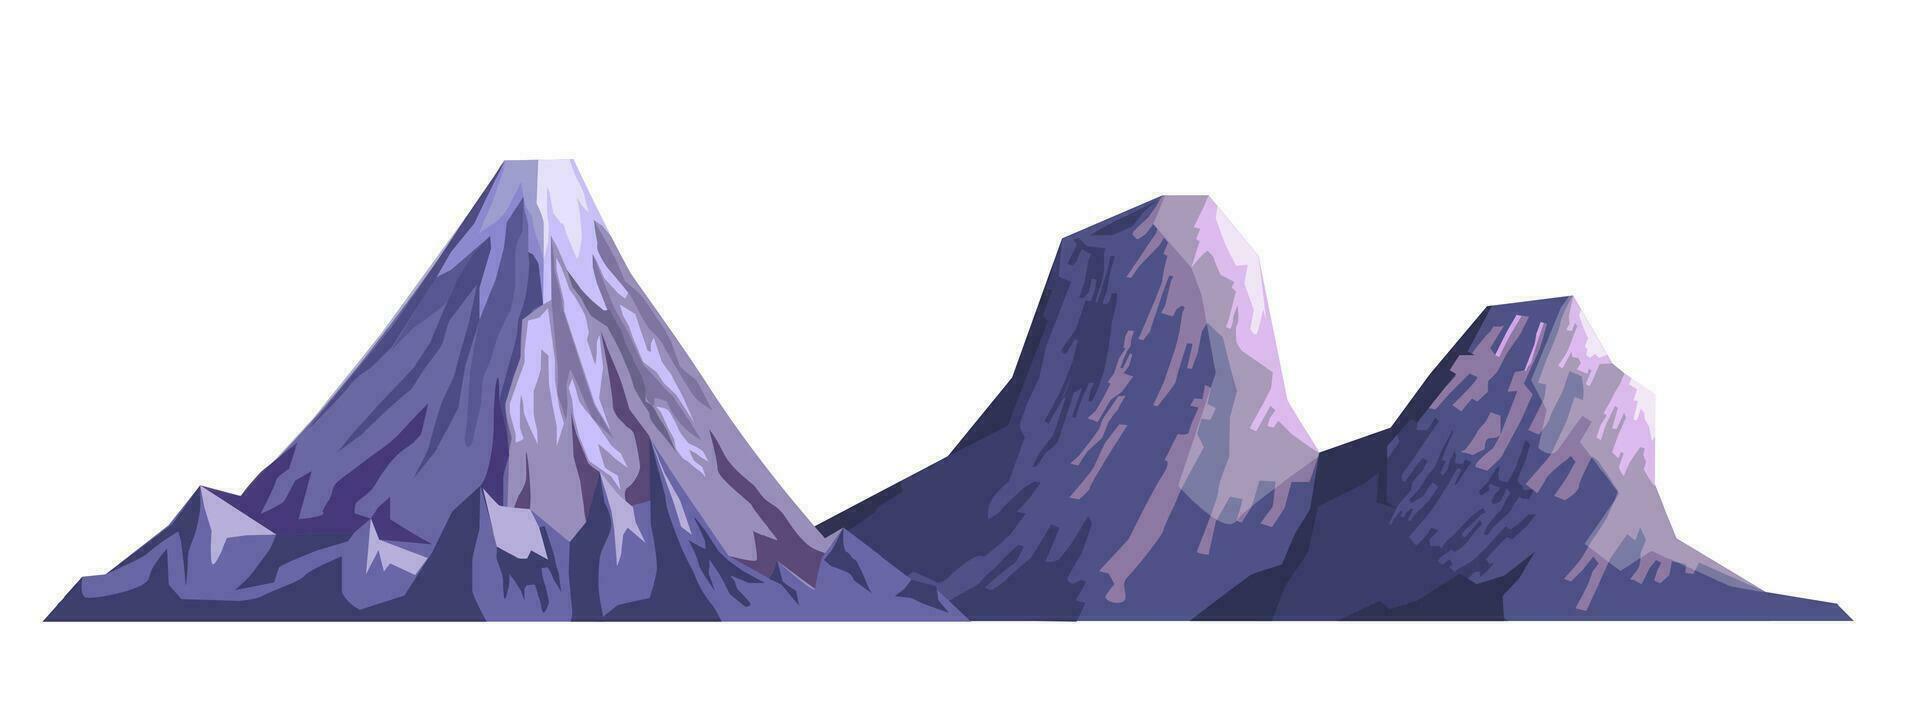 High mountains and rocks, nature scenery vector